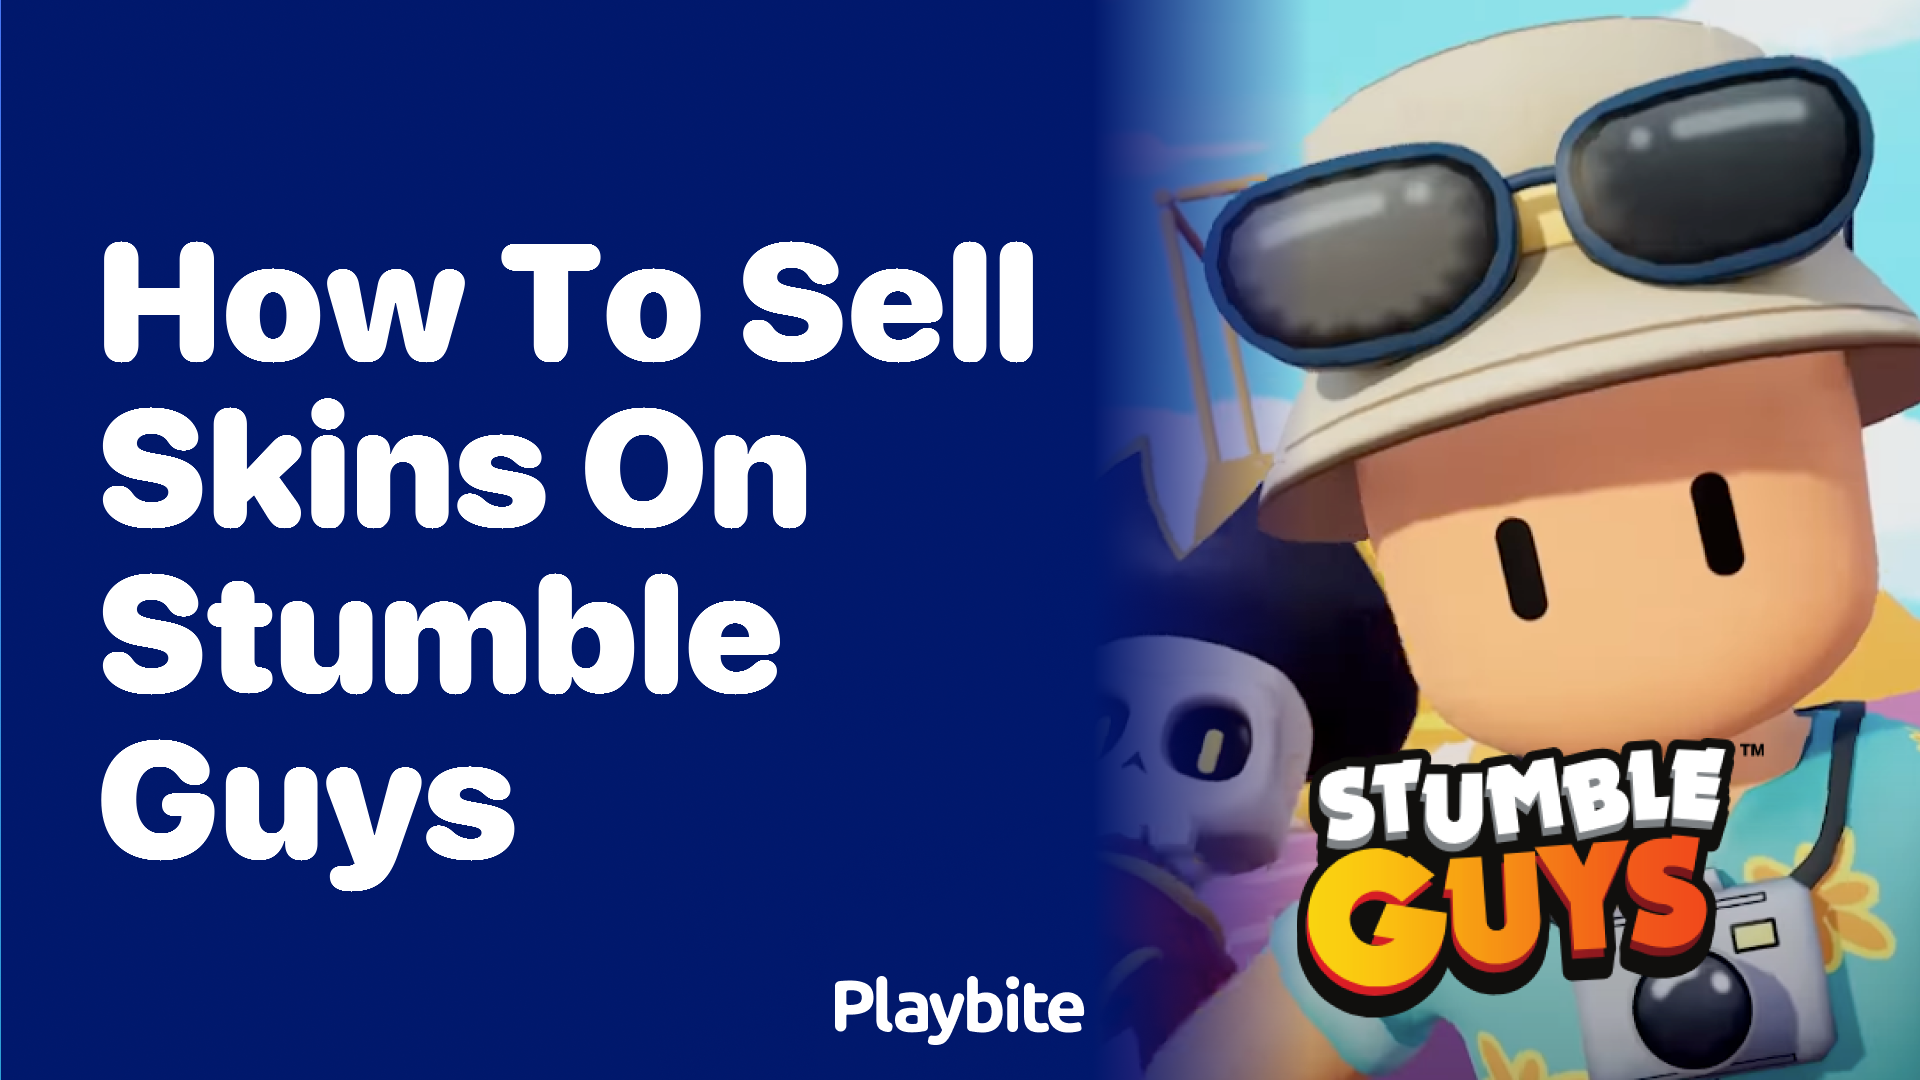 How to Sell Skins on Stumble Guys: A Quick Guide